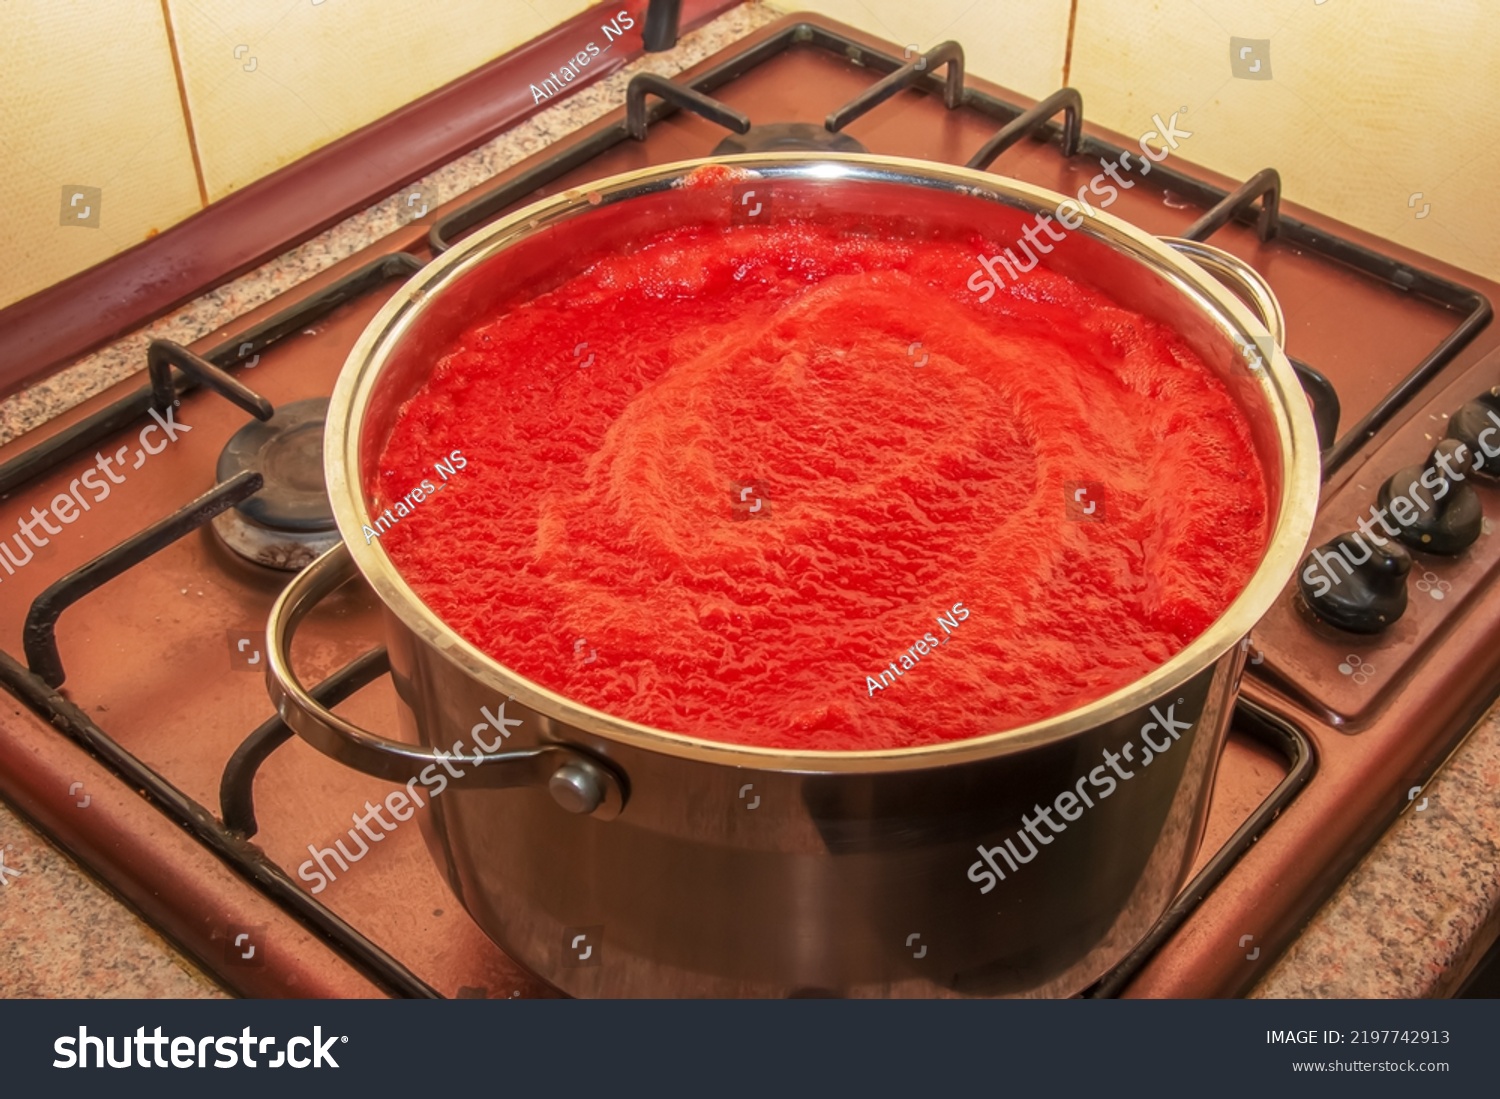 A woman prepares fresh healthy juice from tomatoes. Freshly made tomato juice is boiled in a saucepan and preserved for long-term storage. Diet concept for a healthy lifestyle. #2197742913